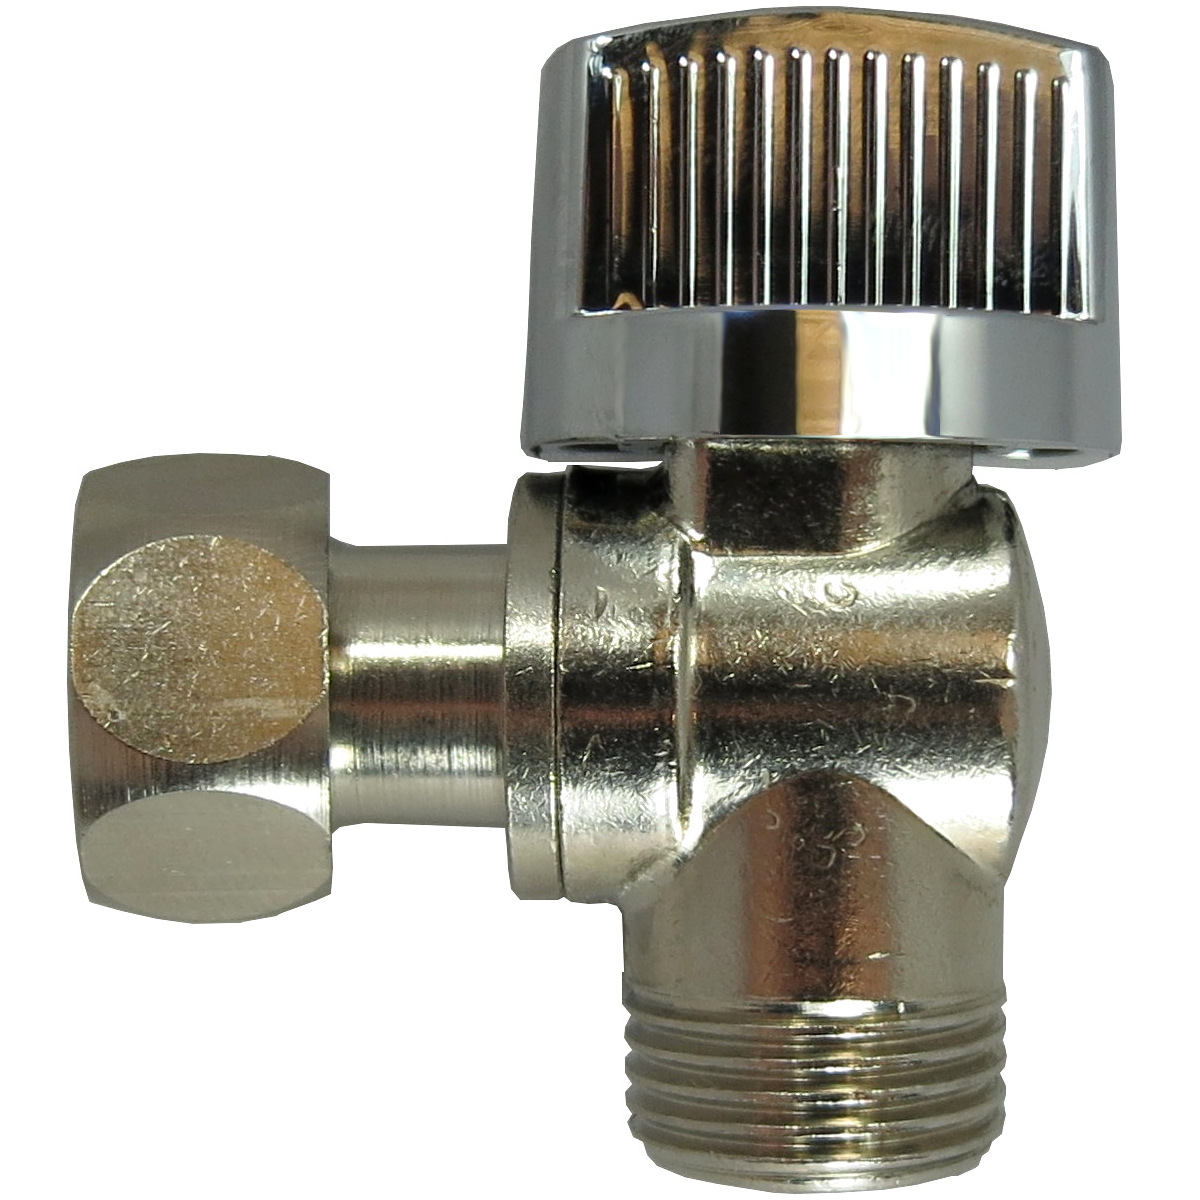 NICKLED ANGLE STOPCOCK WITH SWIVEL NUT